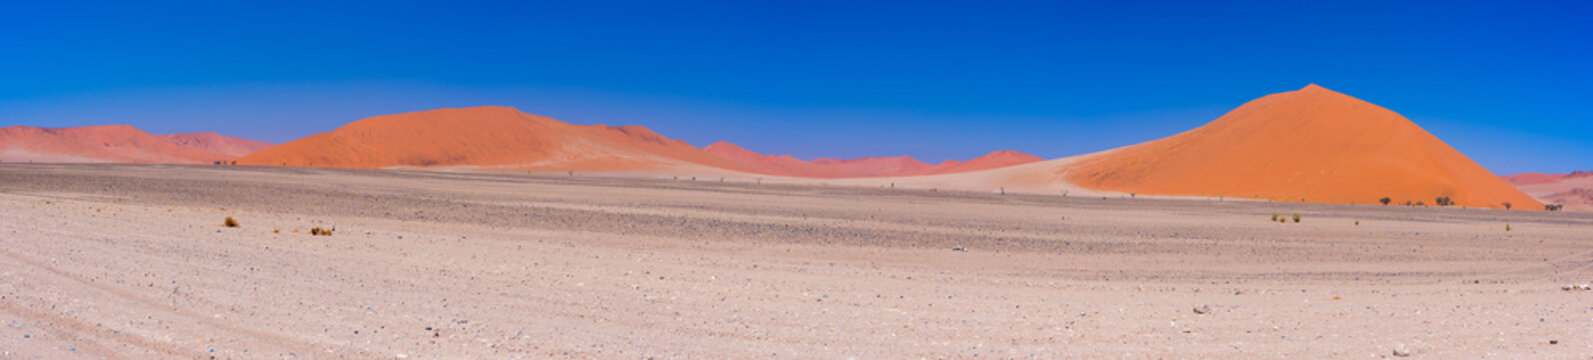 Colorful sand dunes and scenic landscape in the Namib desert, Namib Naukluft National Park, tourist destination in Namibia. Travel adventures in Africa. High resolution panorama.